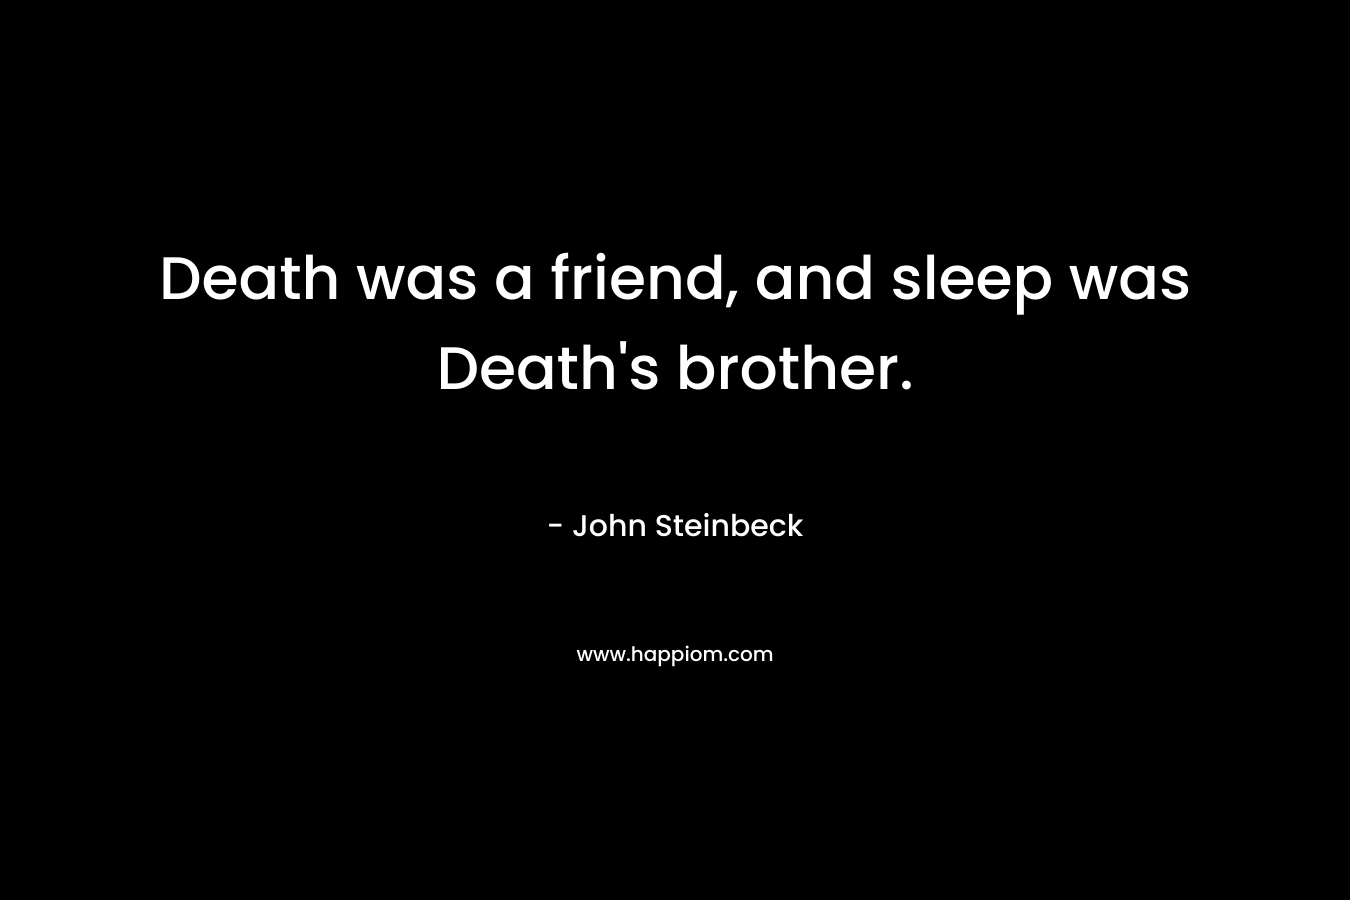 Death was a friend, and sleep was Death’s brother. – John Steinbeck